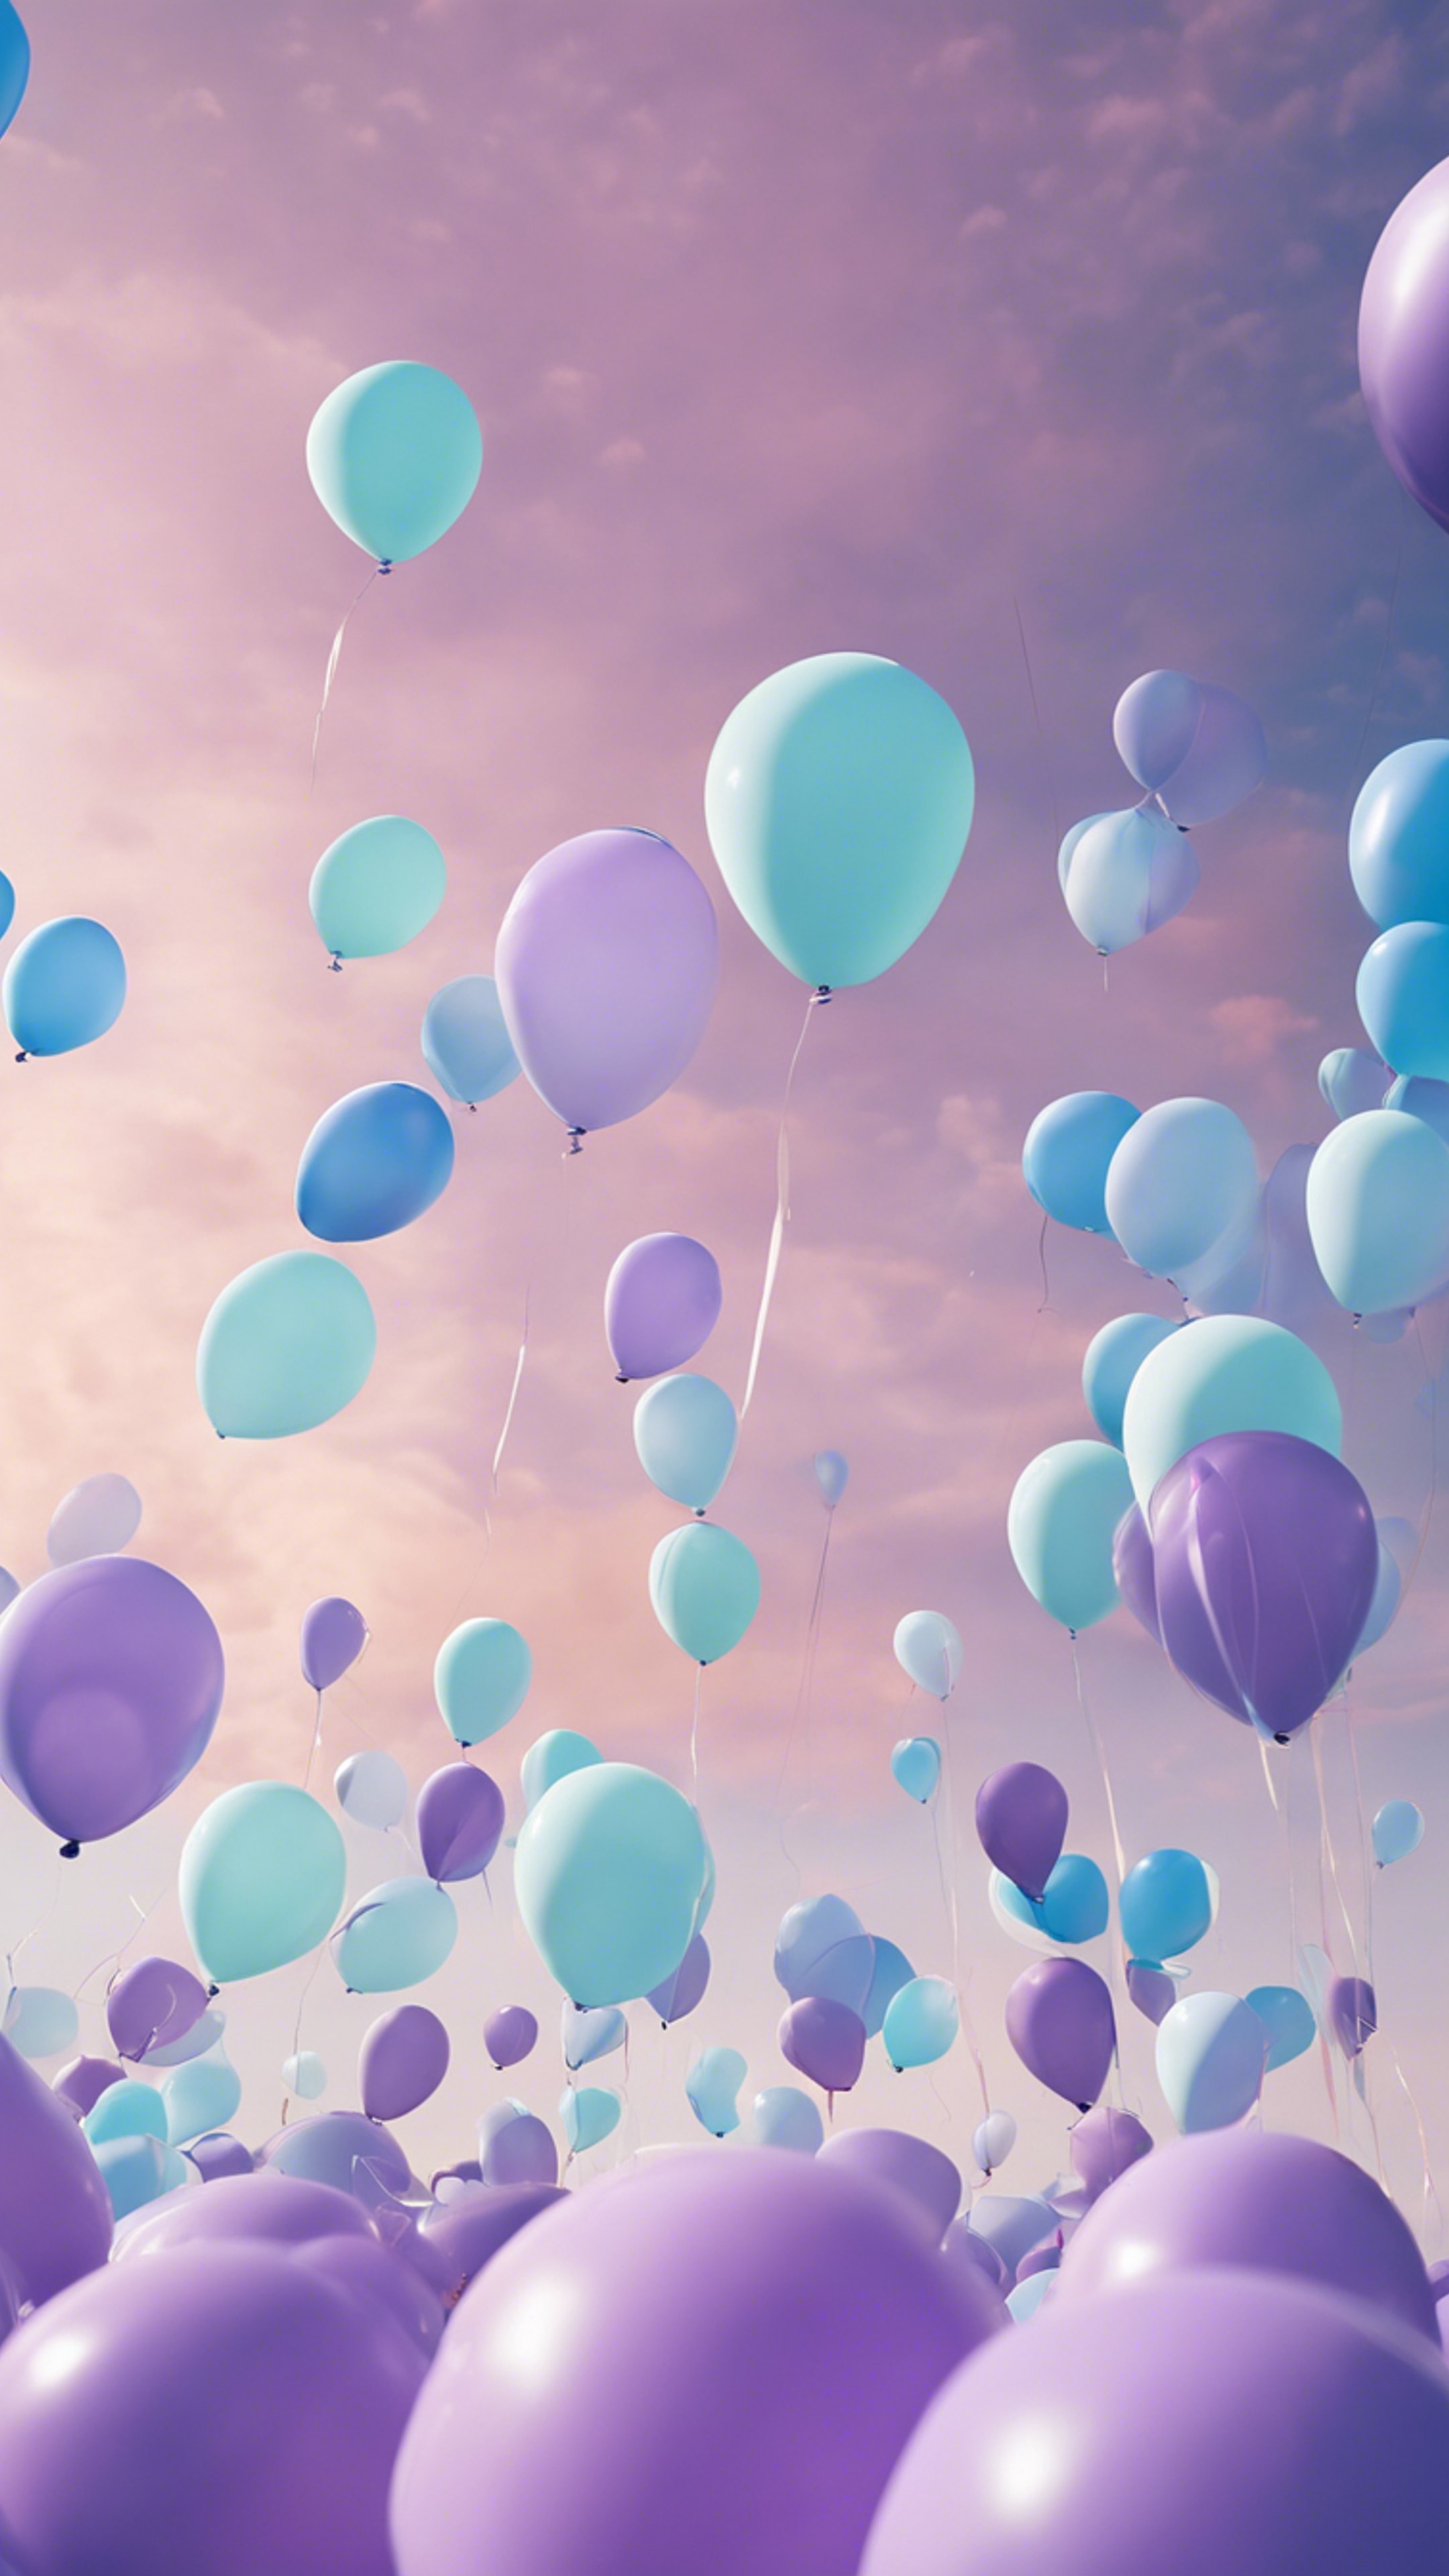 A whimsical scene of pastel purple and blue balloons filling the summer sky. Tapeta[fd1f8f768f0047c48fb6]